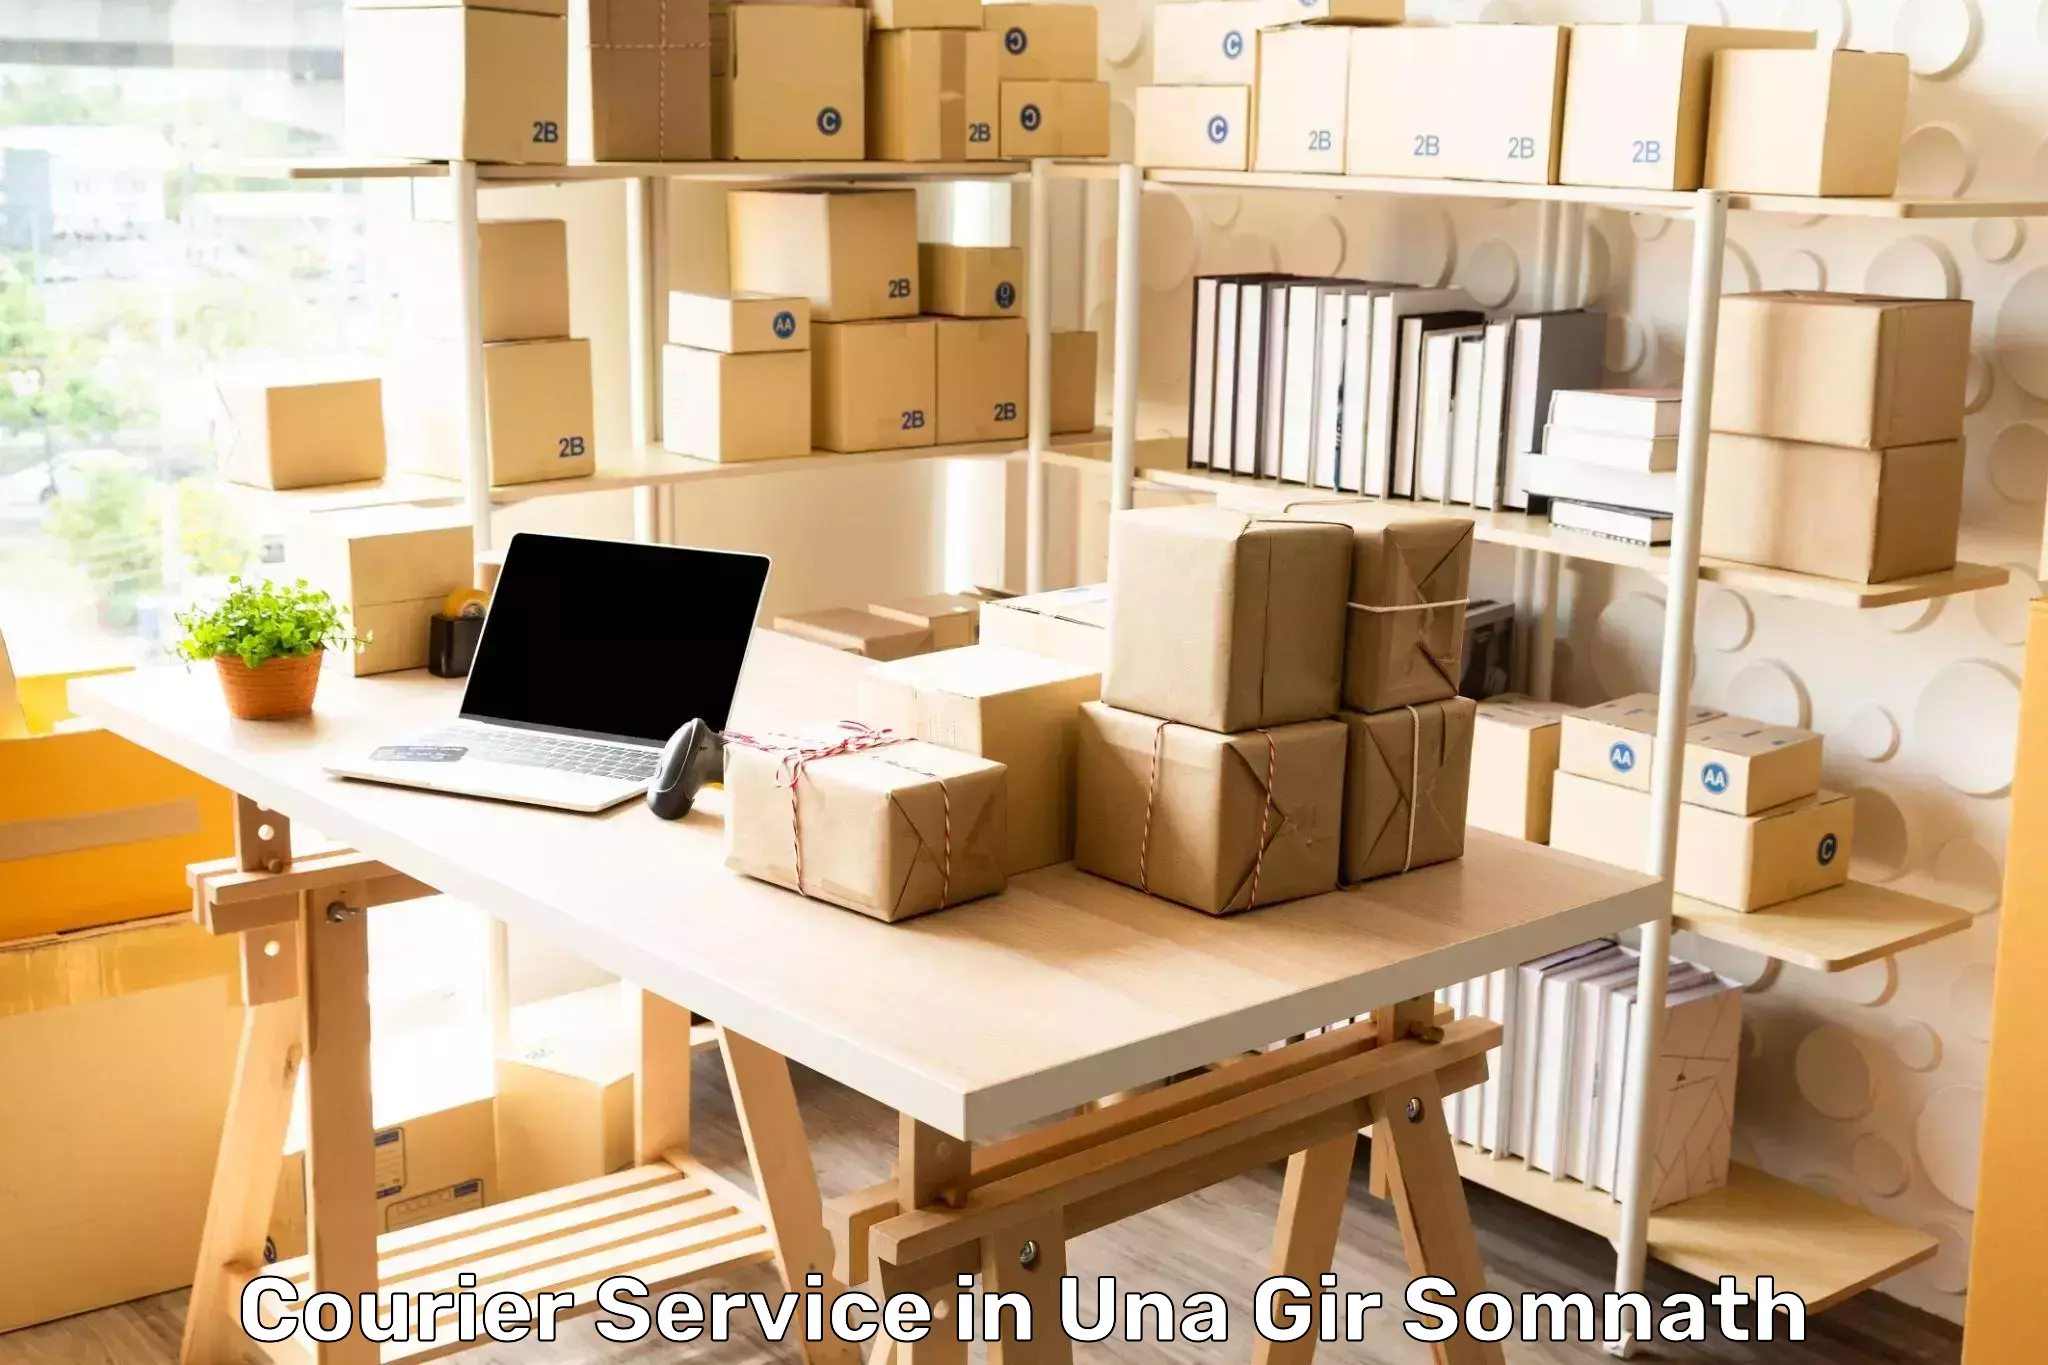 Quality courier partnerships in Una Gir Somnath